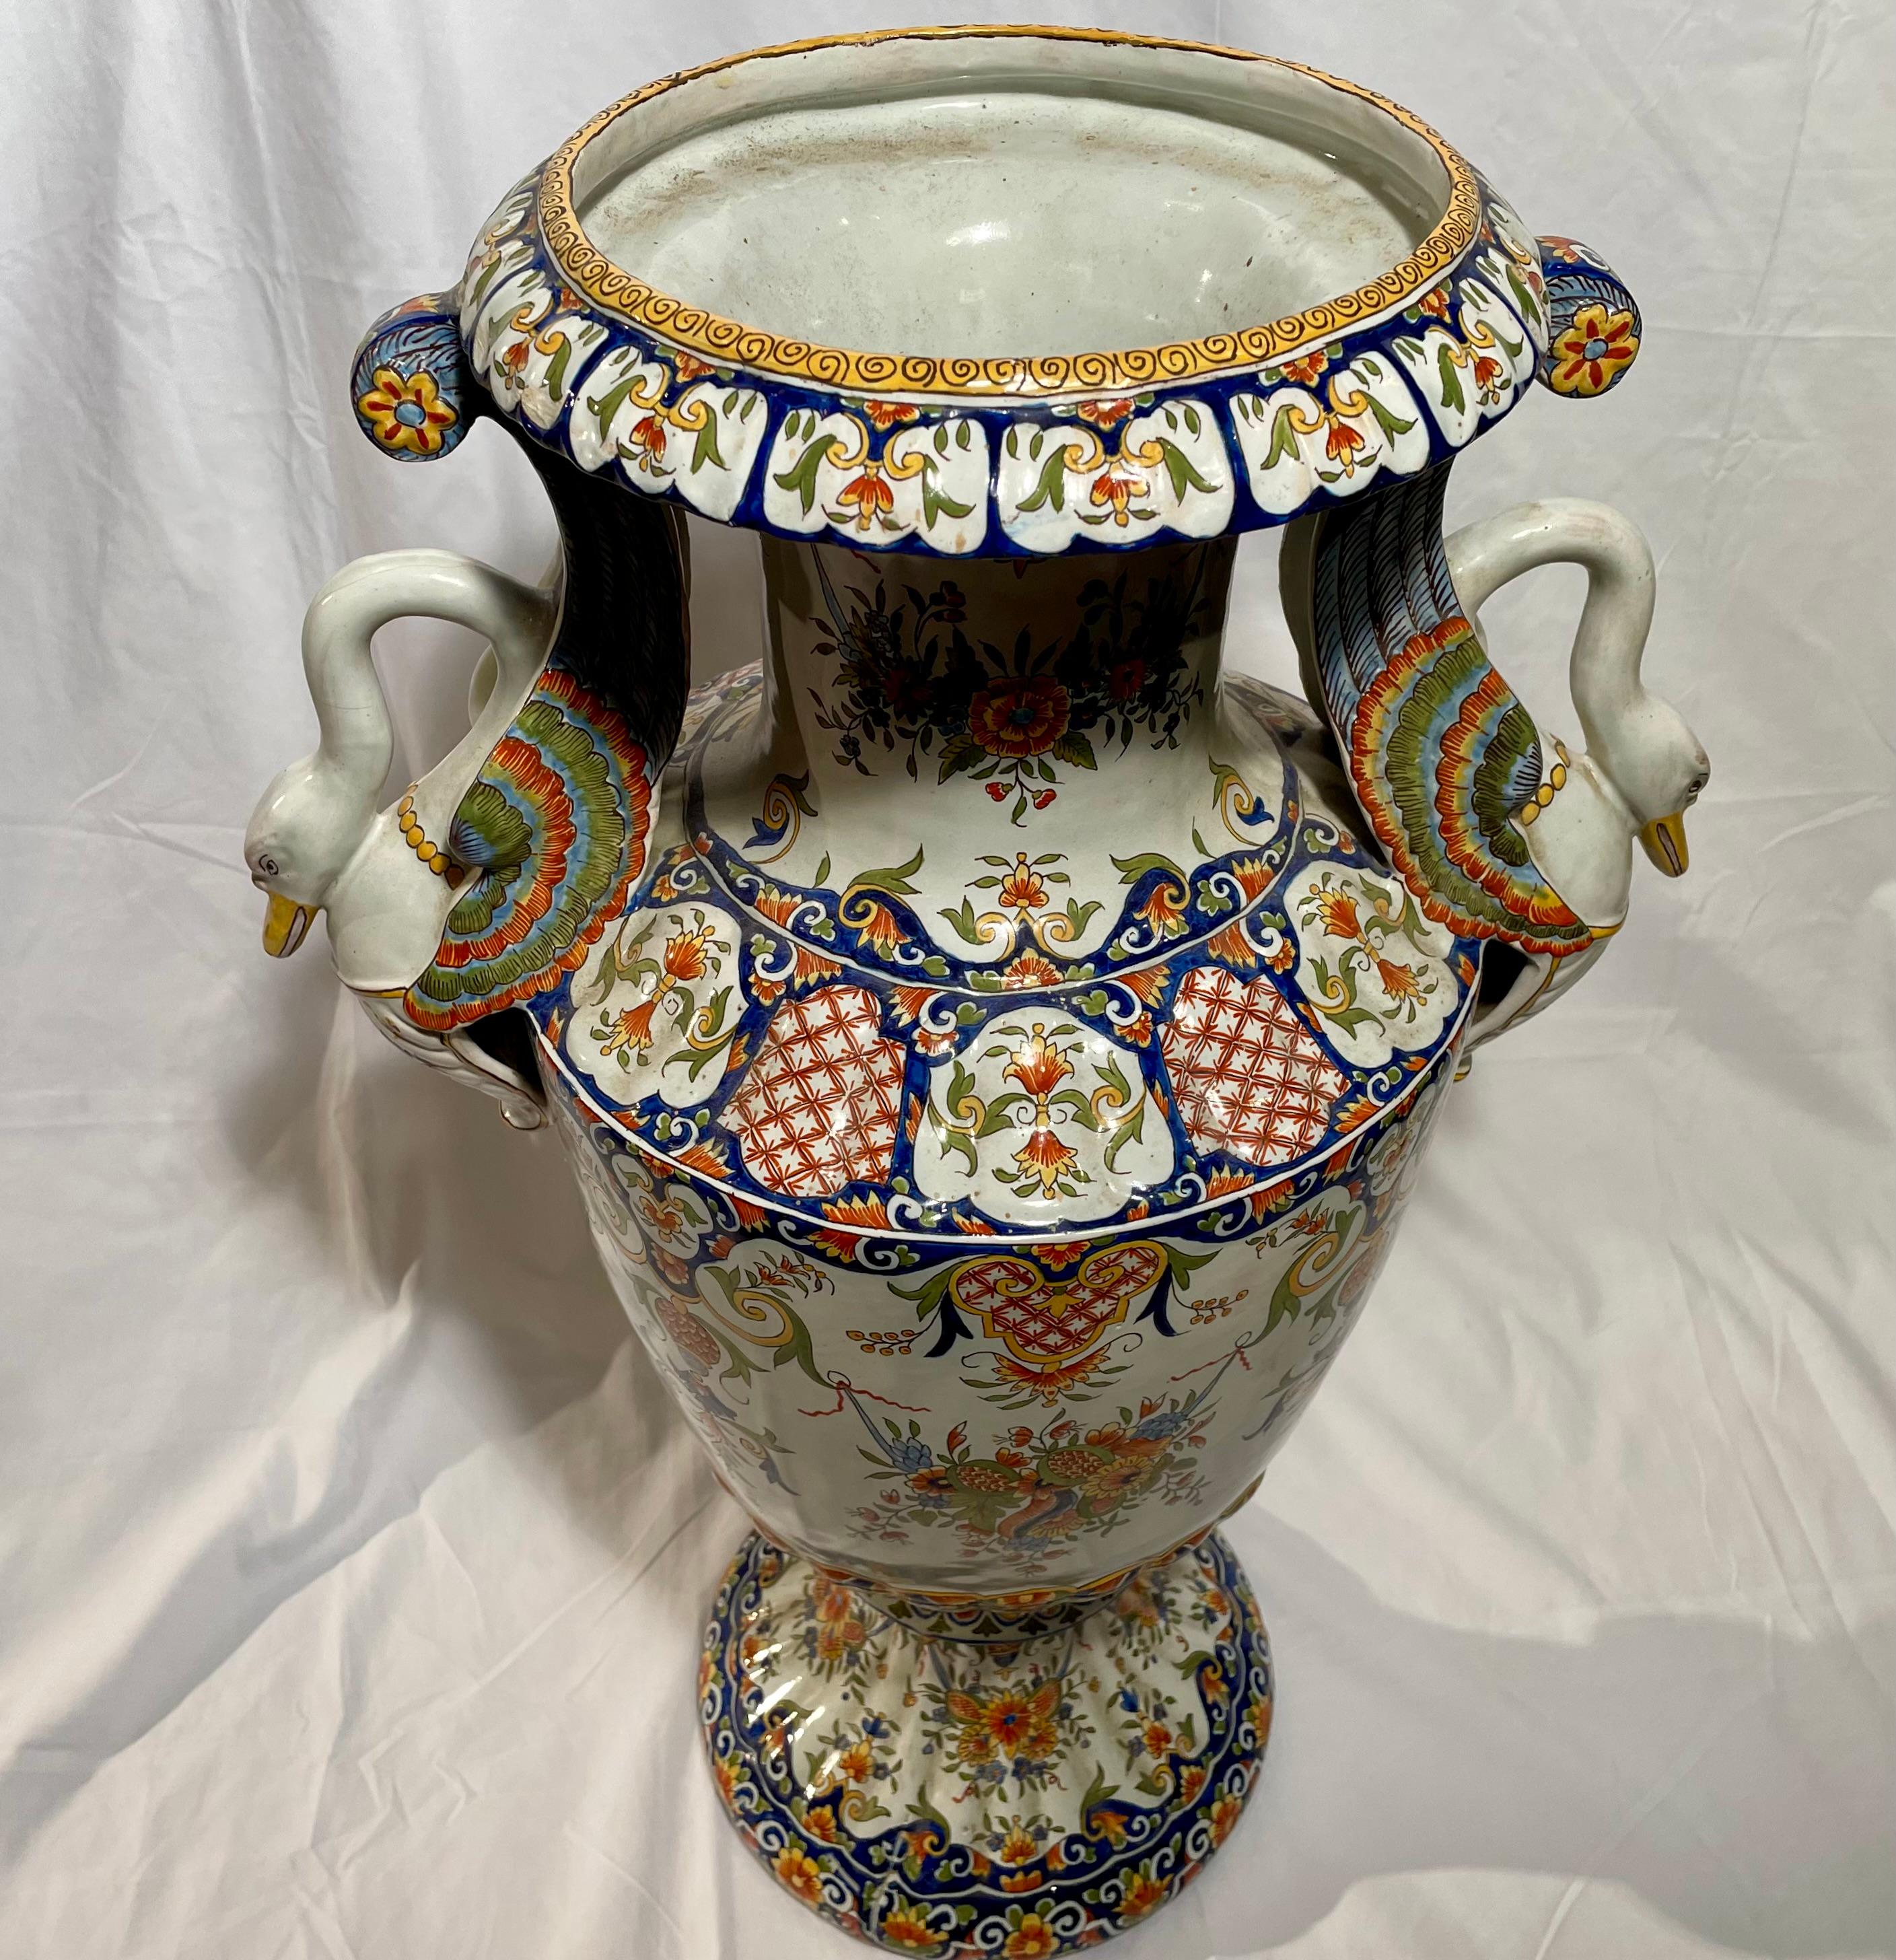 Antique French Faience Enameled Urn, circa 1900-1910 For Sale 2